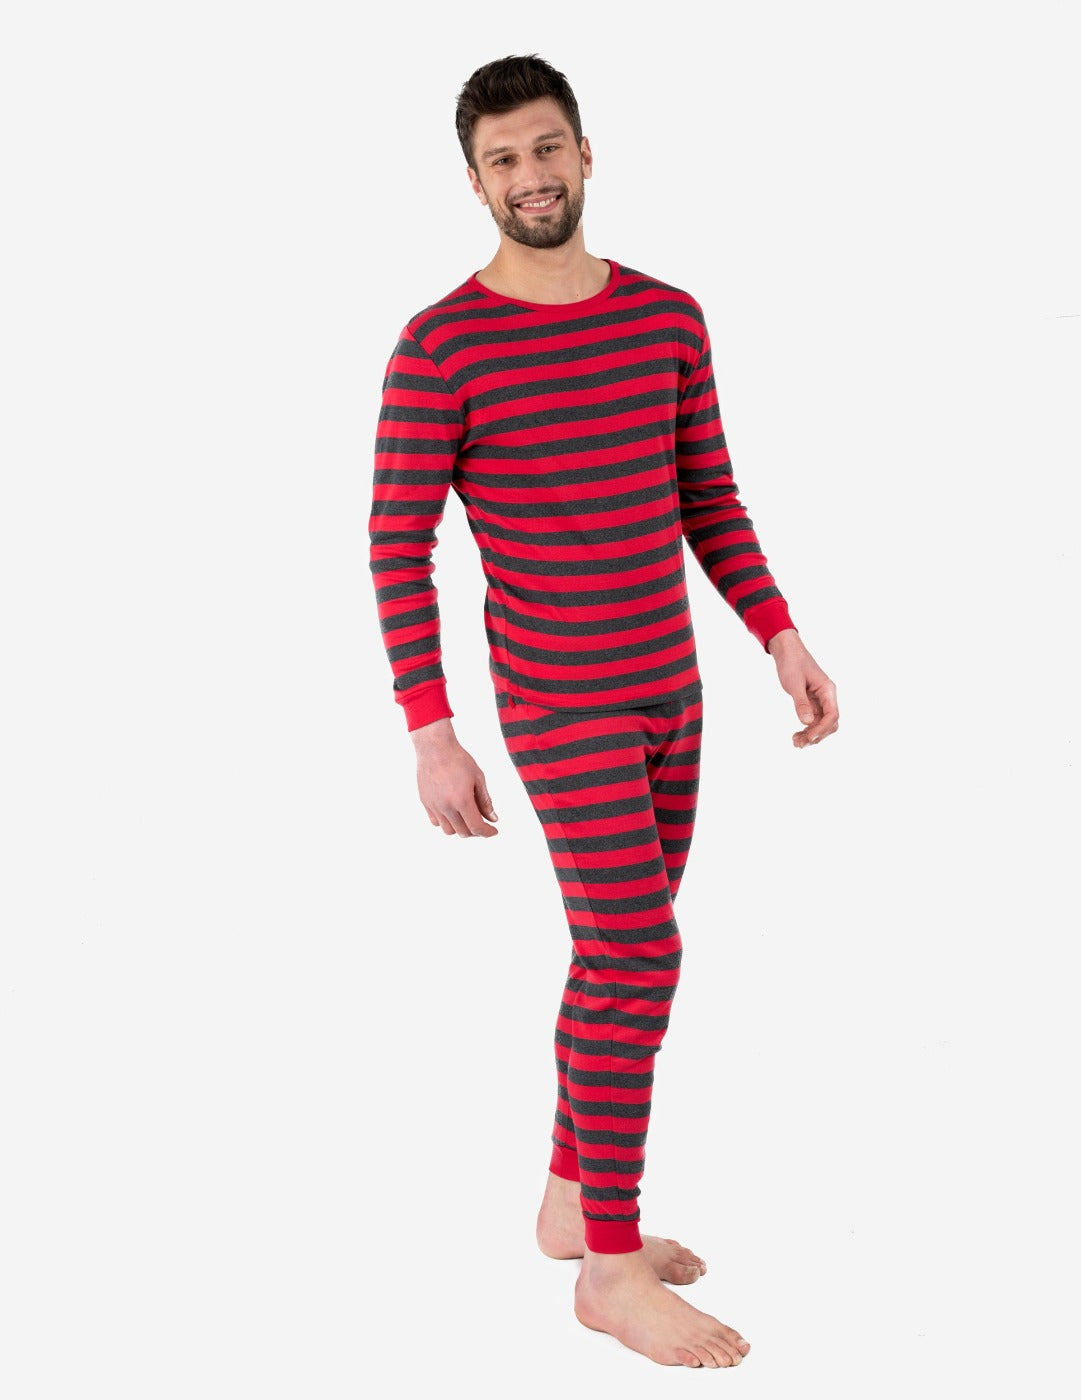 red and grey striped men's pajama